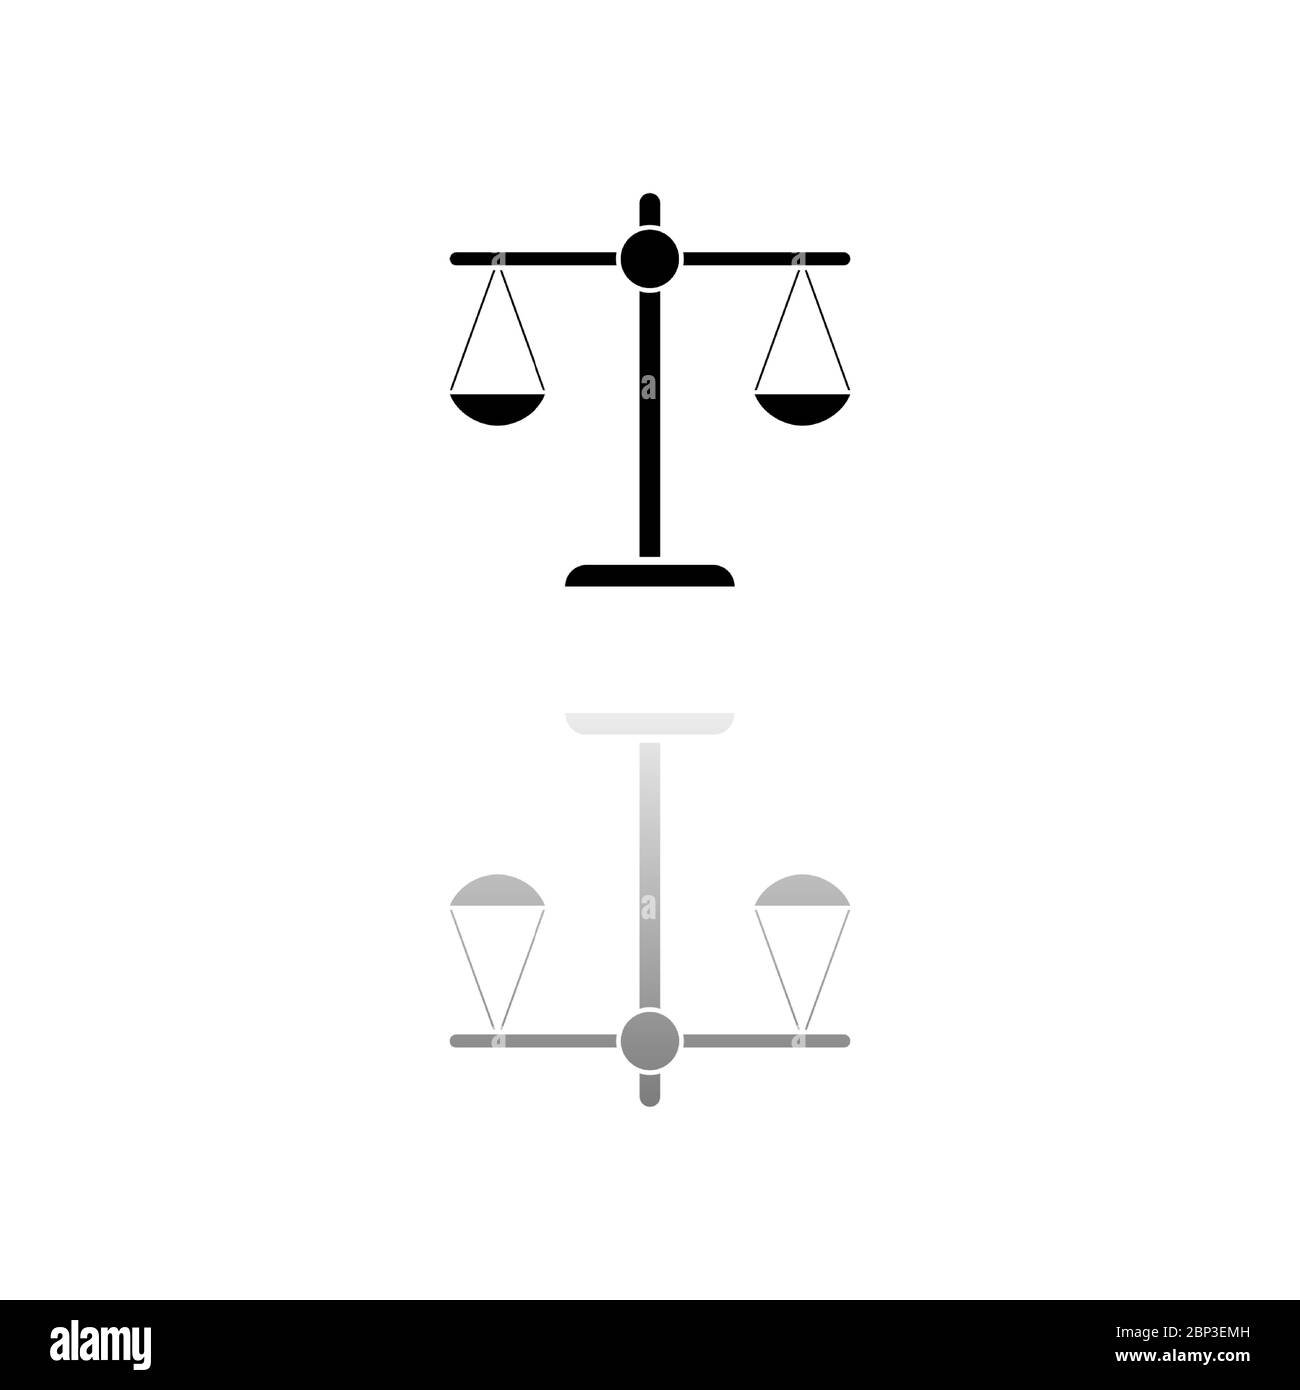 Justice scale. Black symbol on white background. Simple illustration. Flat Vector Icon. Mirror Reflection Shadow. Can be used in logo, web, mobile and Stock Vector